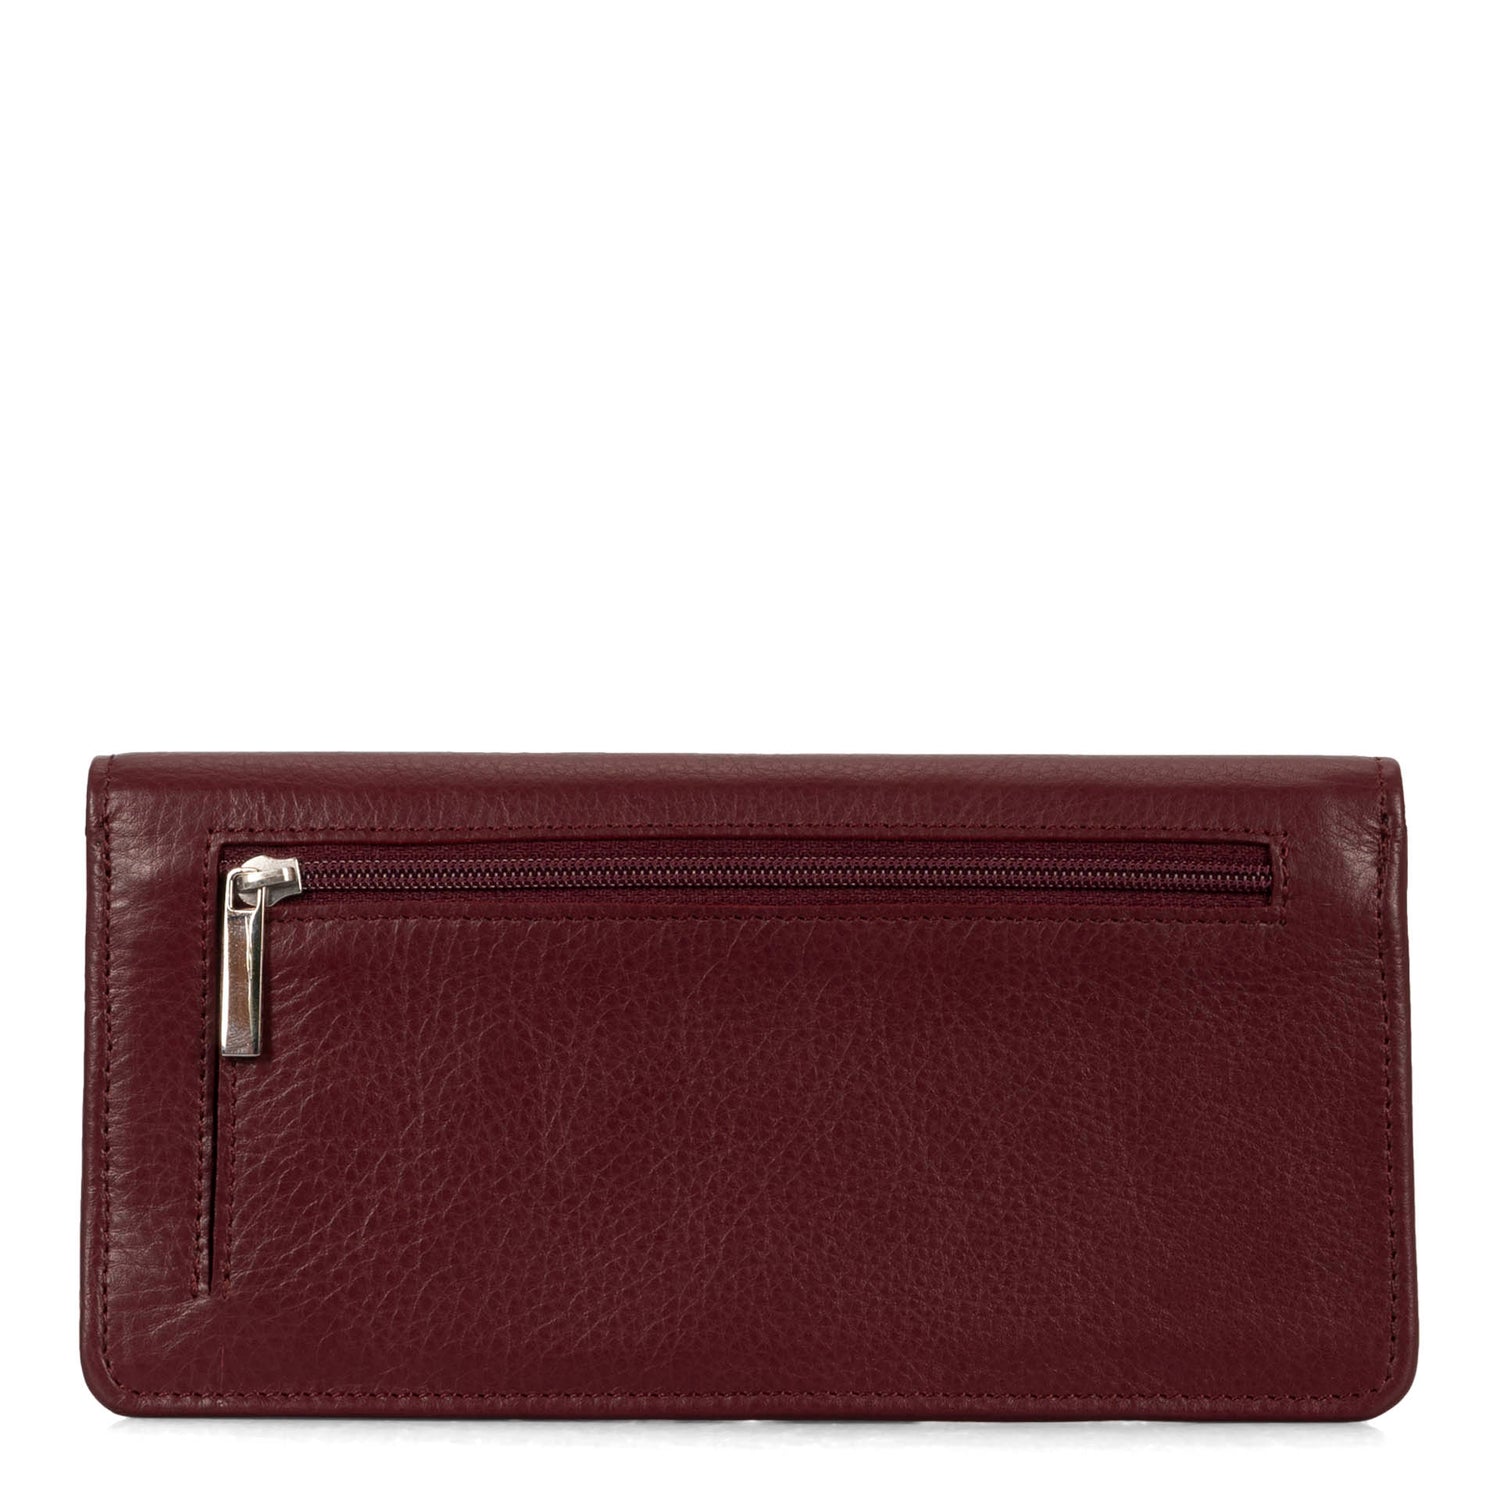 Back side of a burgundy women's wallet called Kelly designed by Tracker showing its hidden exterior compartment and smooth leather texture.